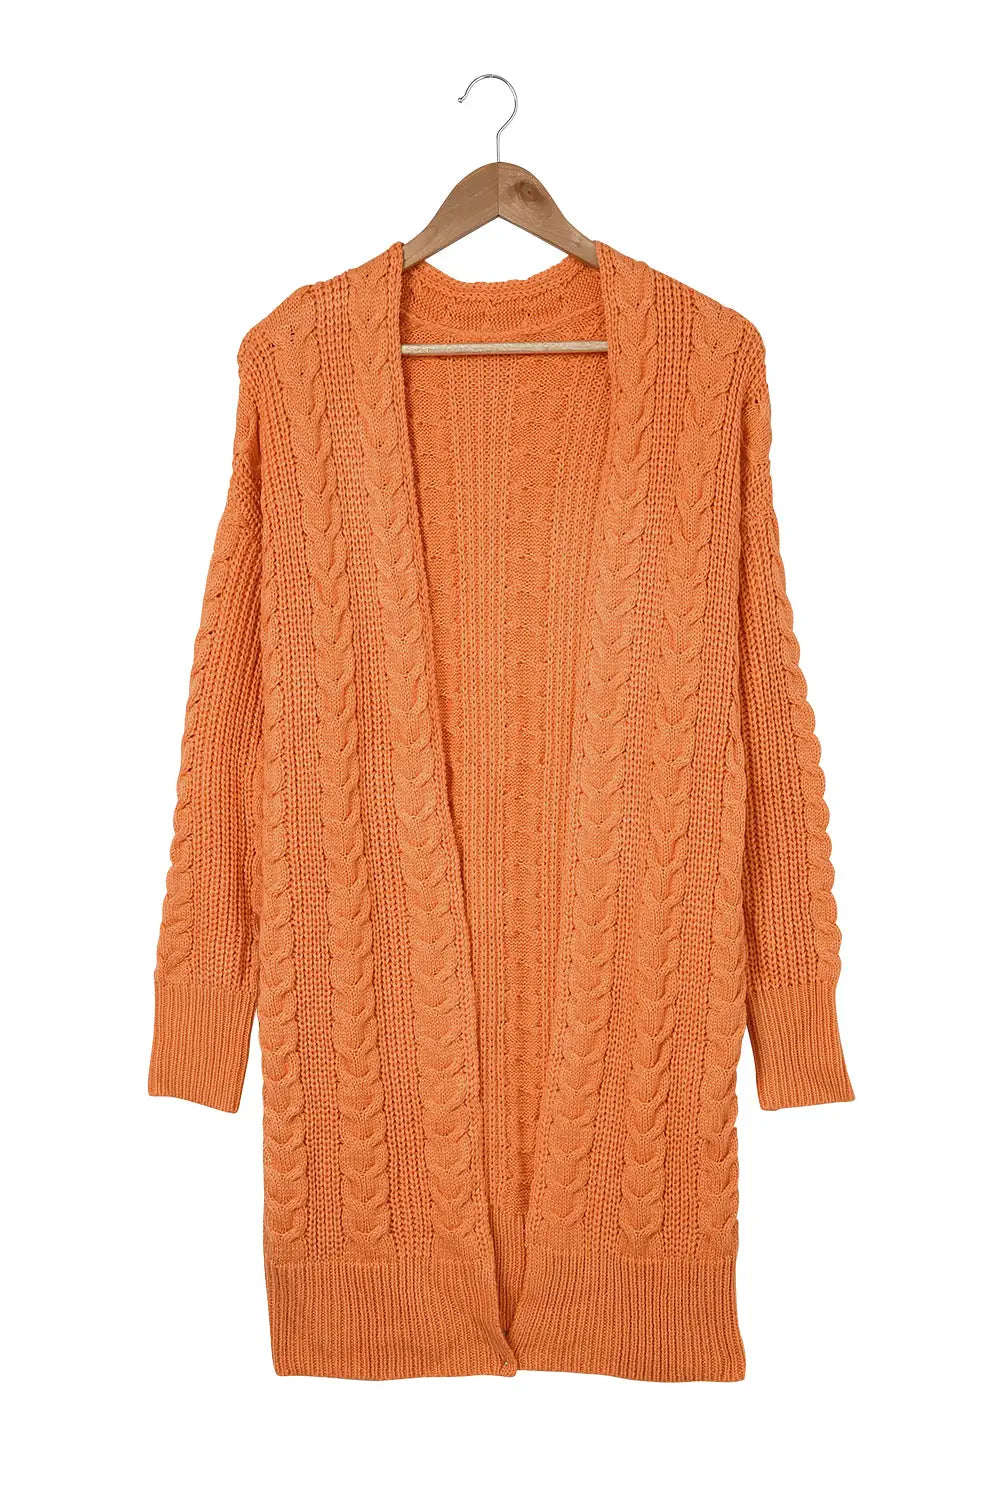 Orange chunky knit open front cardigan - sweaters & cardigans